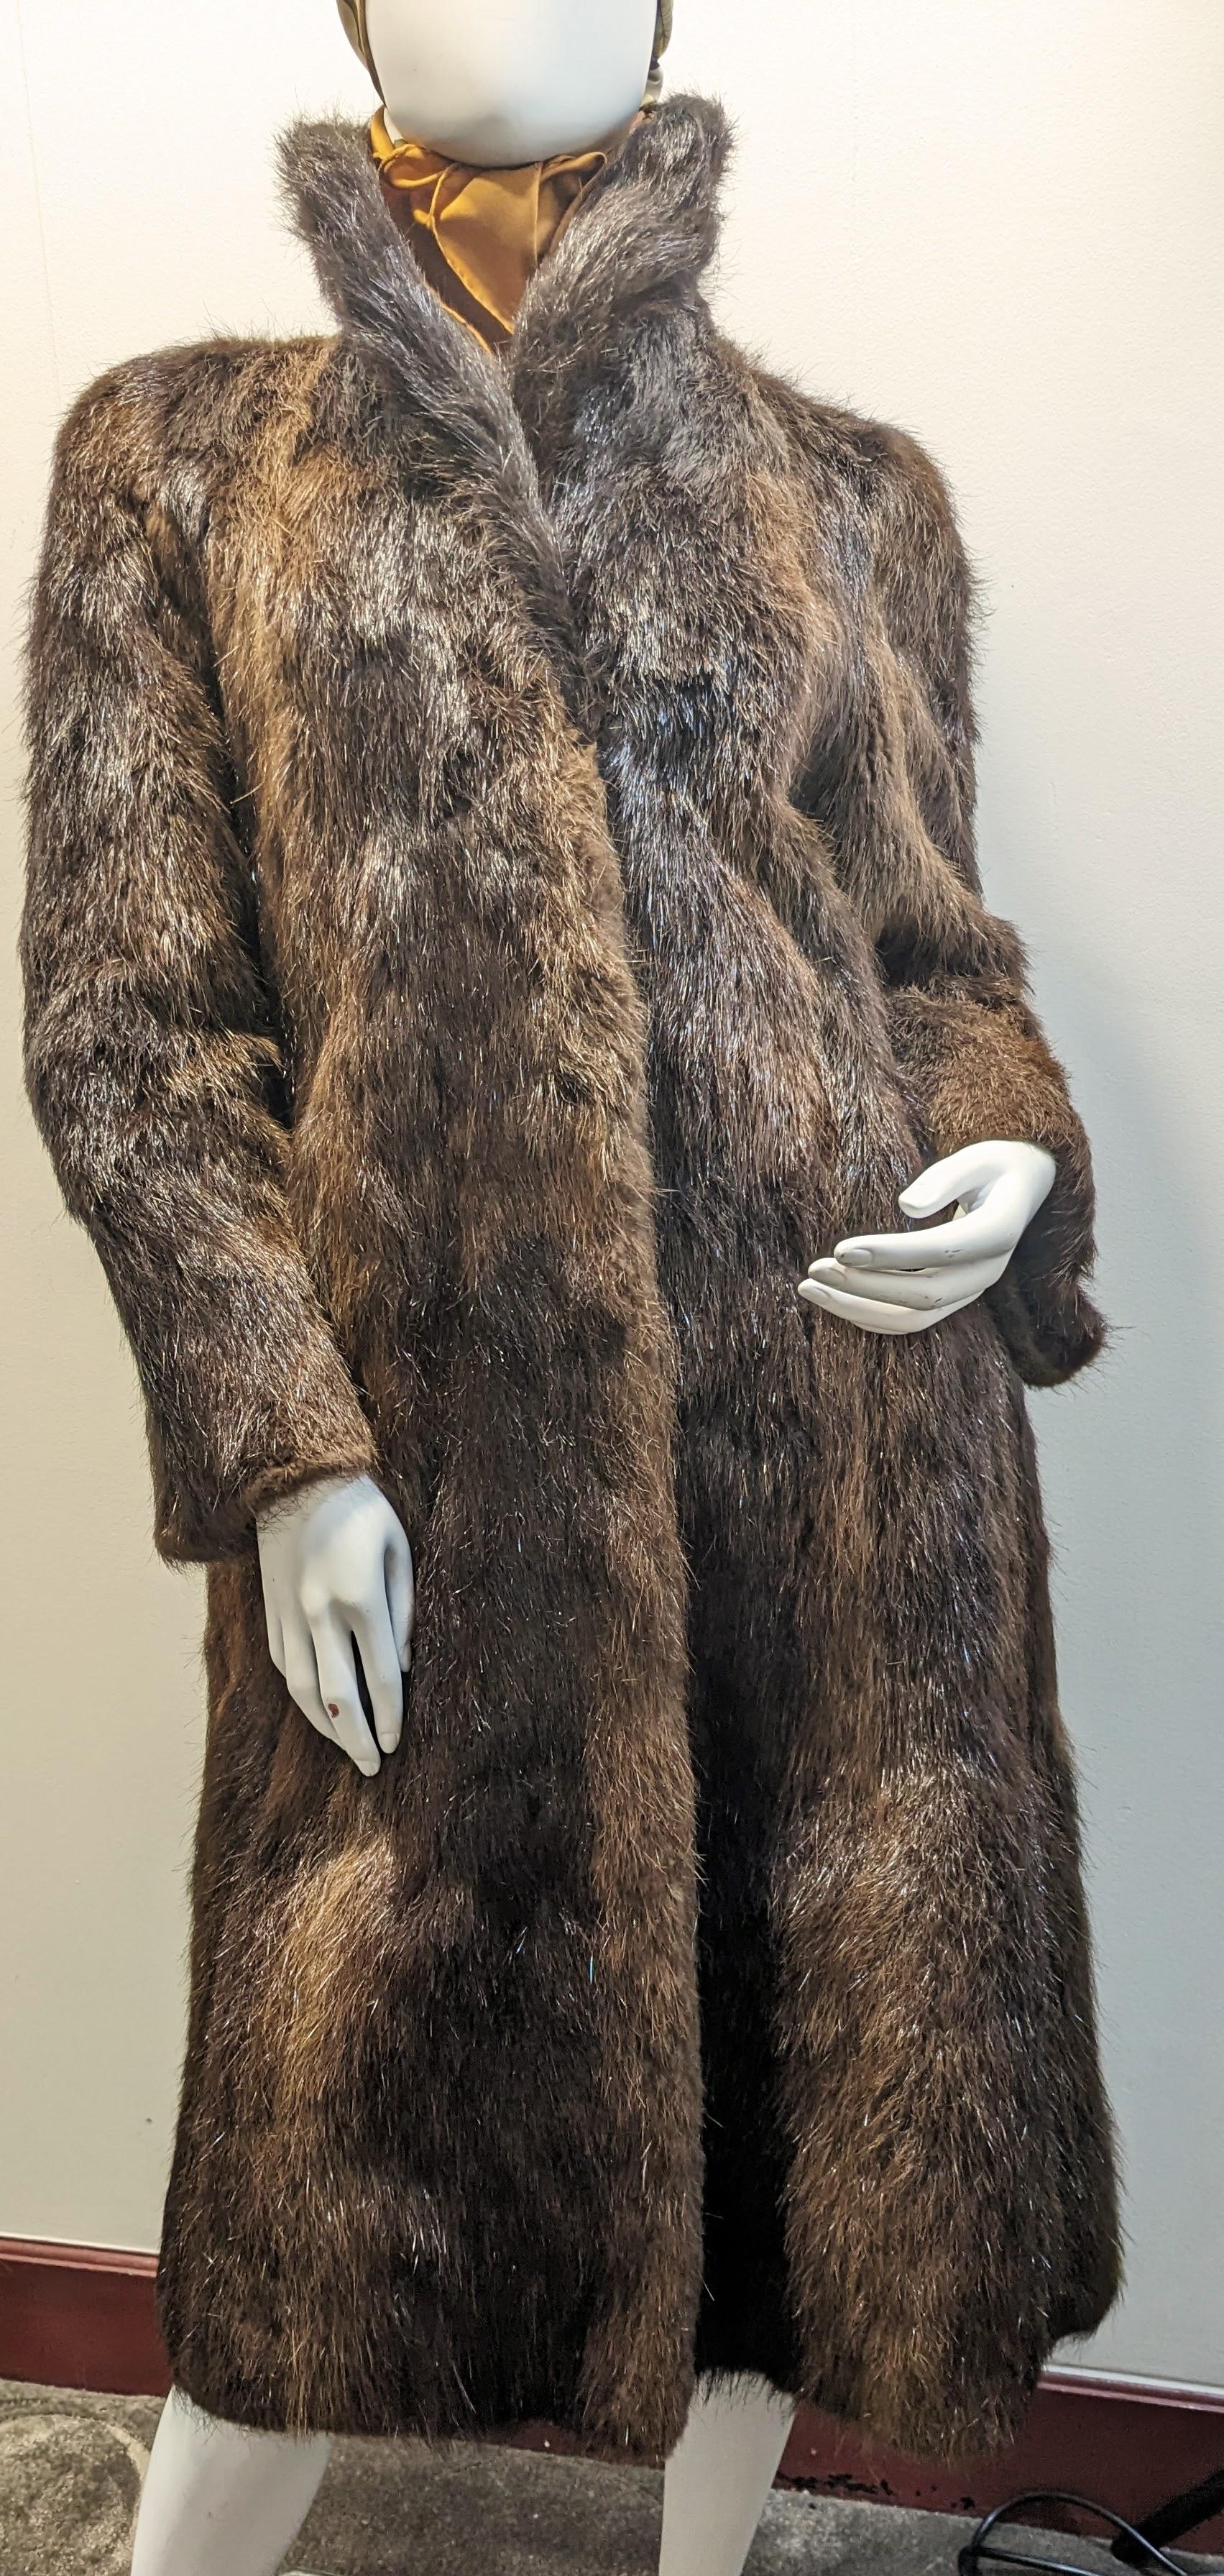 Delfín Abad Bilbao Brown Beaver  Coat 
 Moderate lapel collar and V-neck; Three snap hook and loop closures at the front. External pockets on both sides,


COAT MEASURES:
LENGTH 1115cm 45,27 inches
UNDERARM TO HAND 62cm 24,4 inches

Our Company